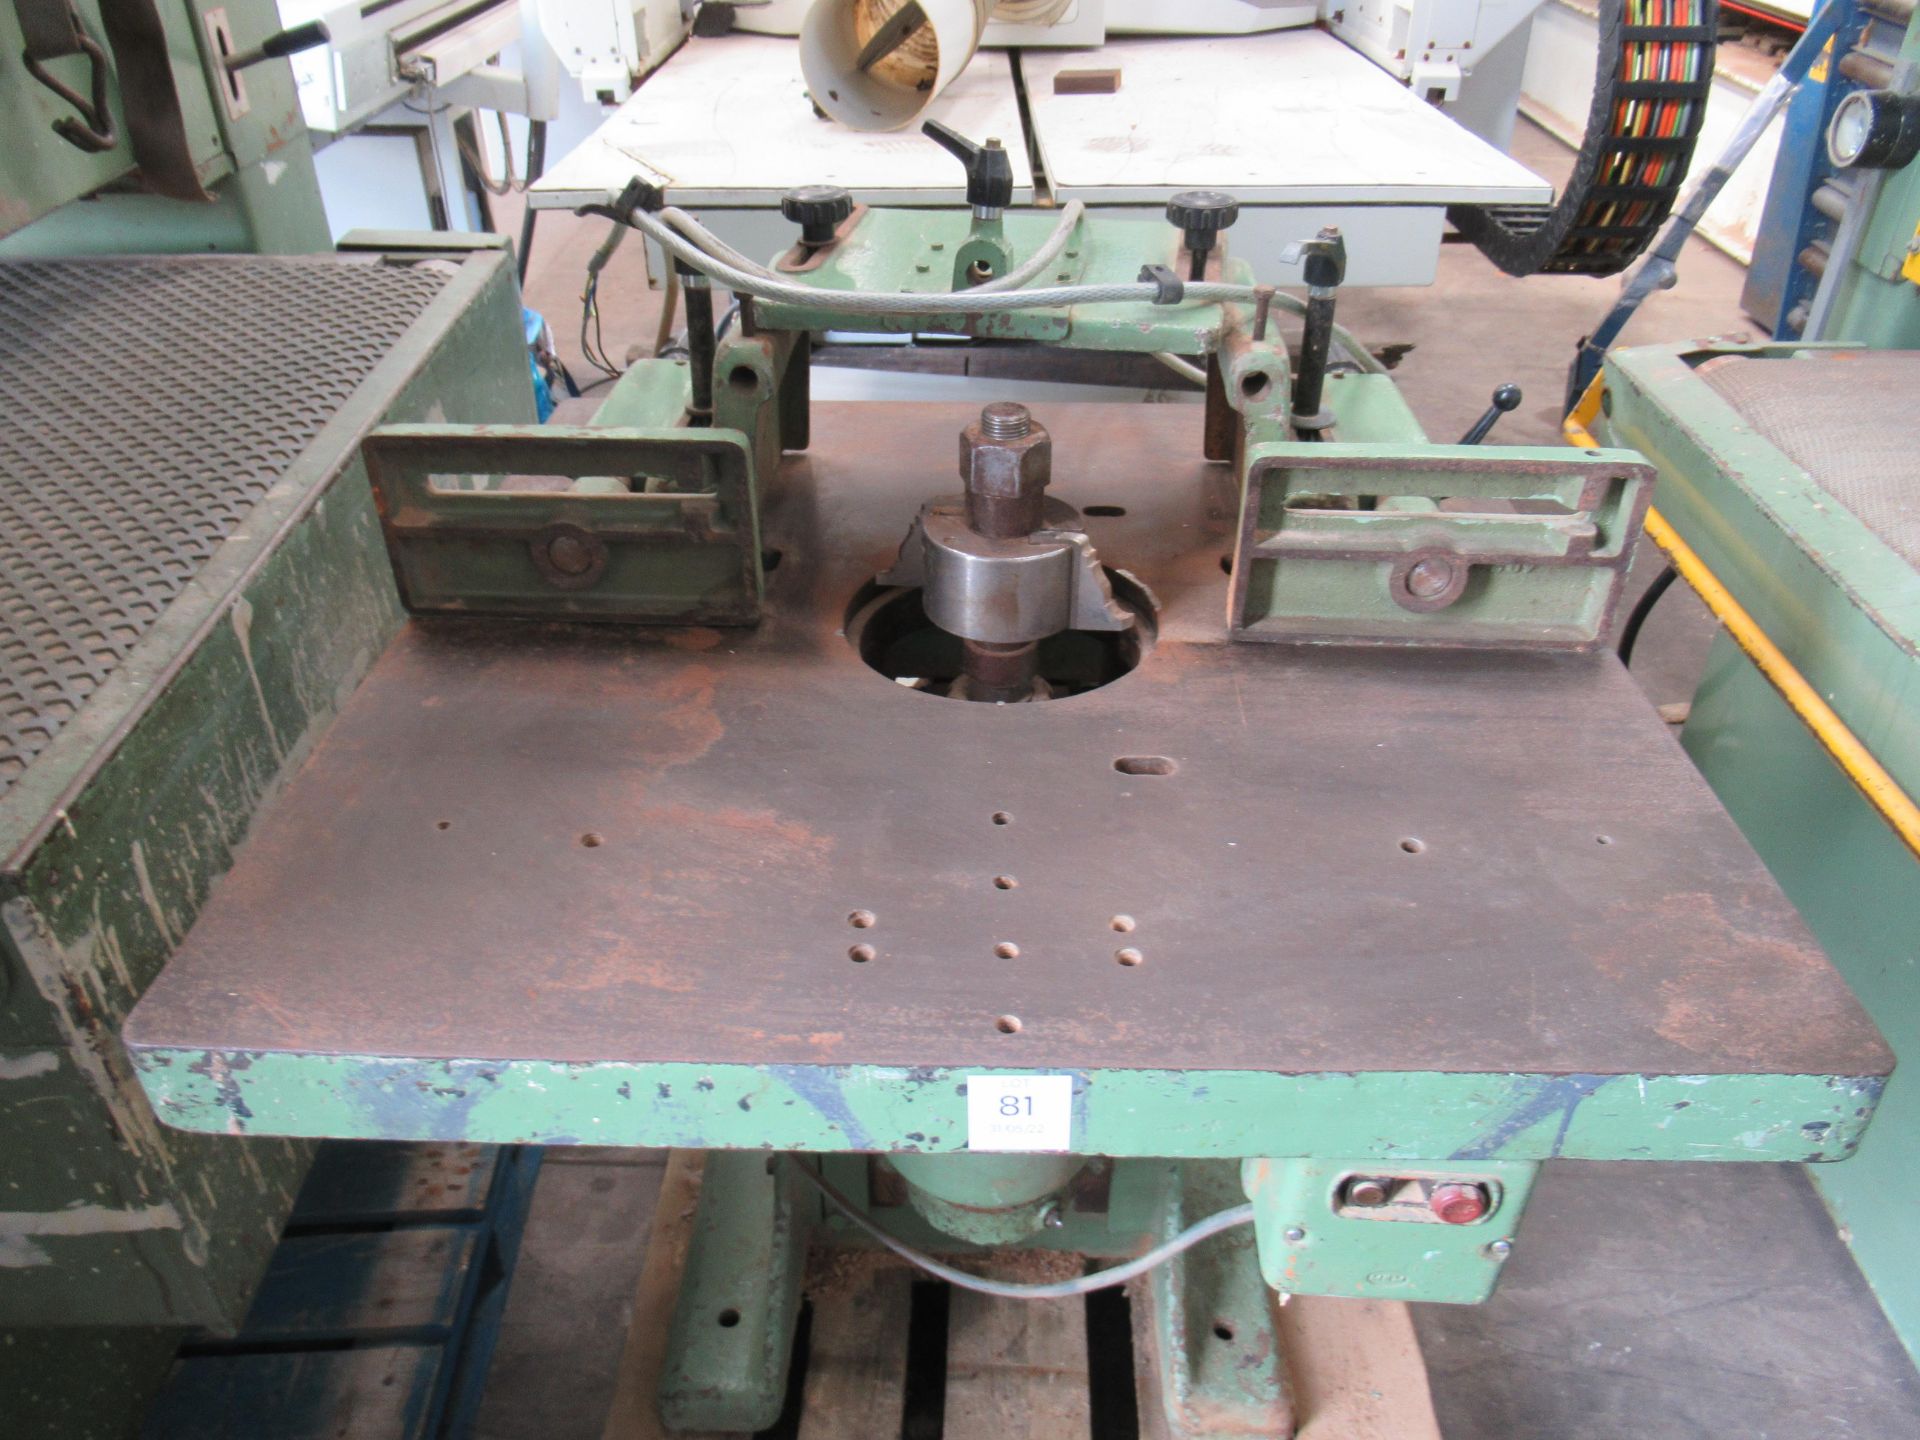 Dangwaert Spindle Moulder 3PH. Please note there is a £15 plus VAT Lift Out Fee on this lot - Image 2 of 4